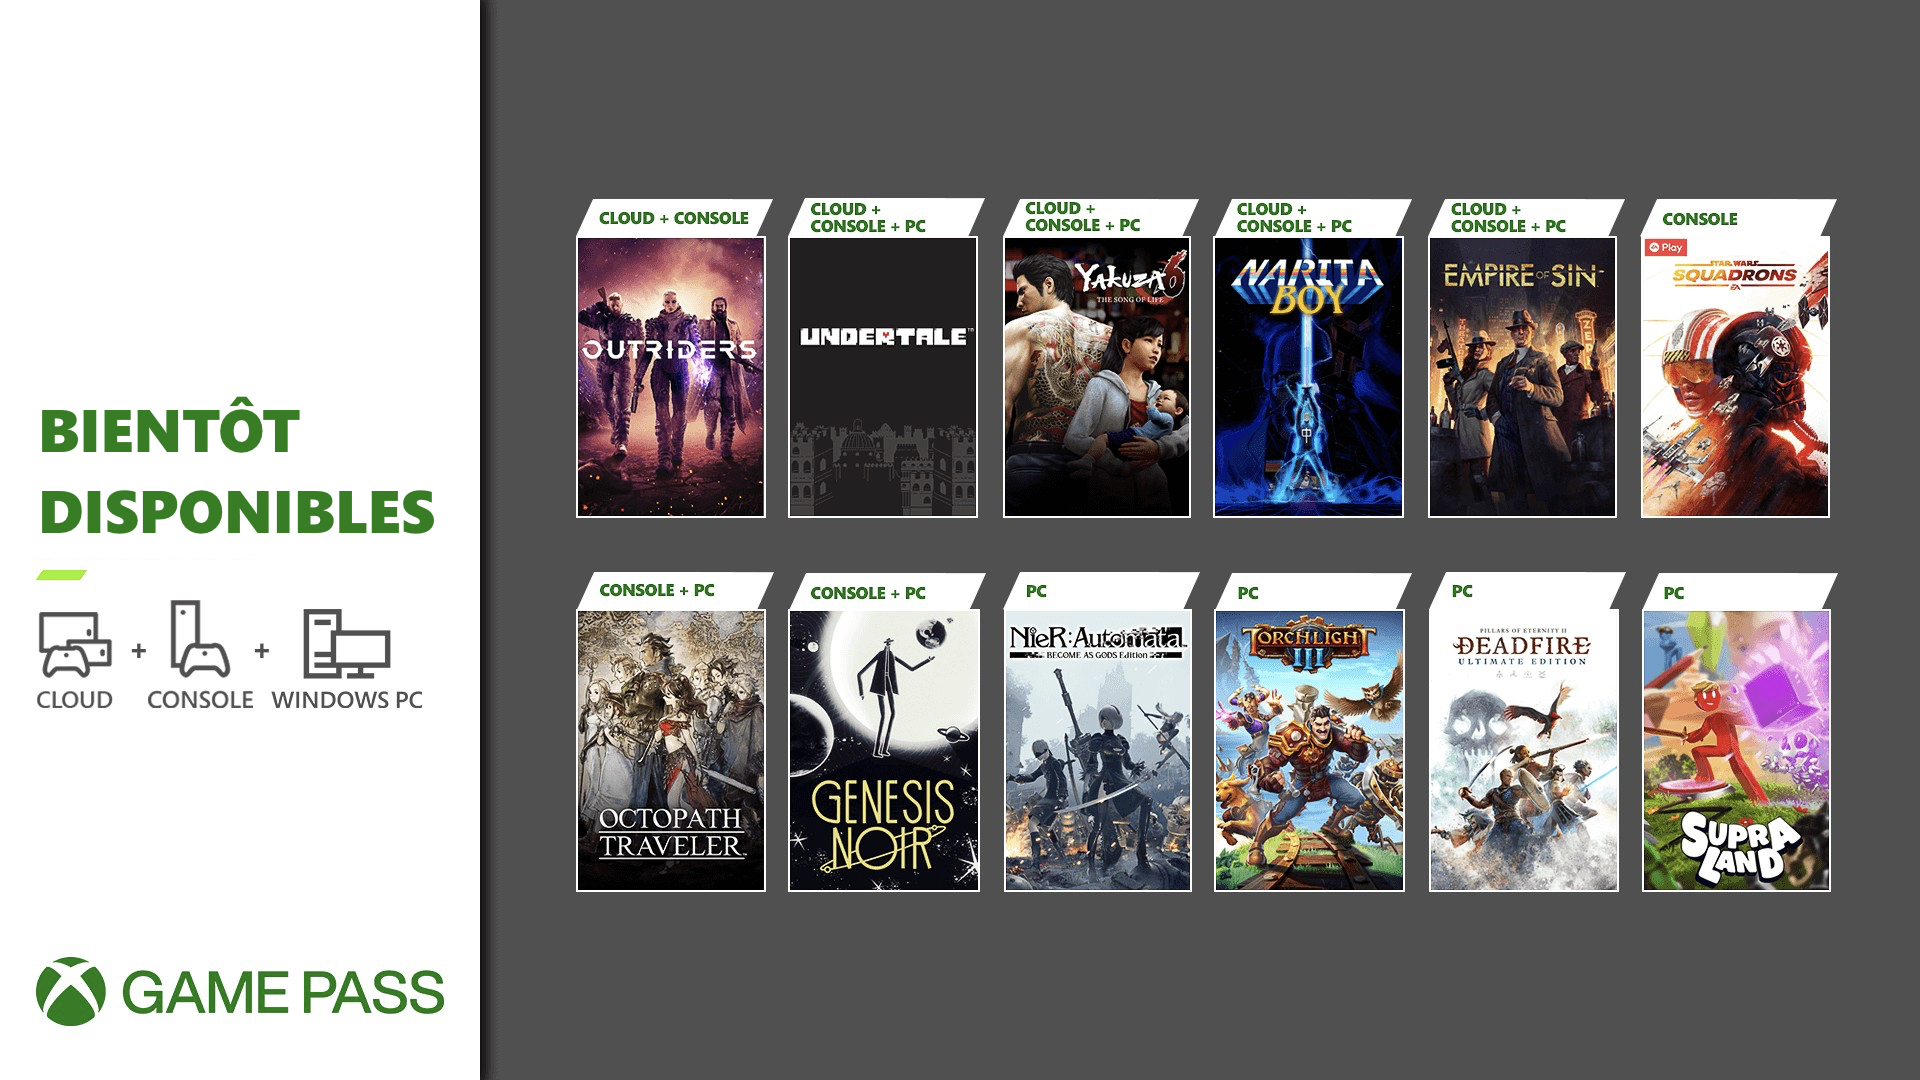 Prochainement dans le Xbox Game Pass : Outriders, Octopath Traveler, Yakuza 6: The Song of Life et d’autres